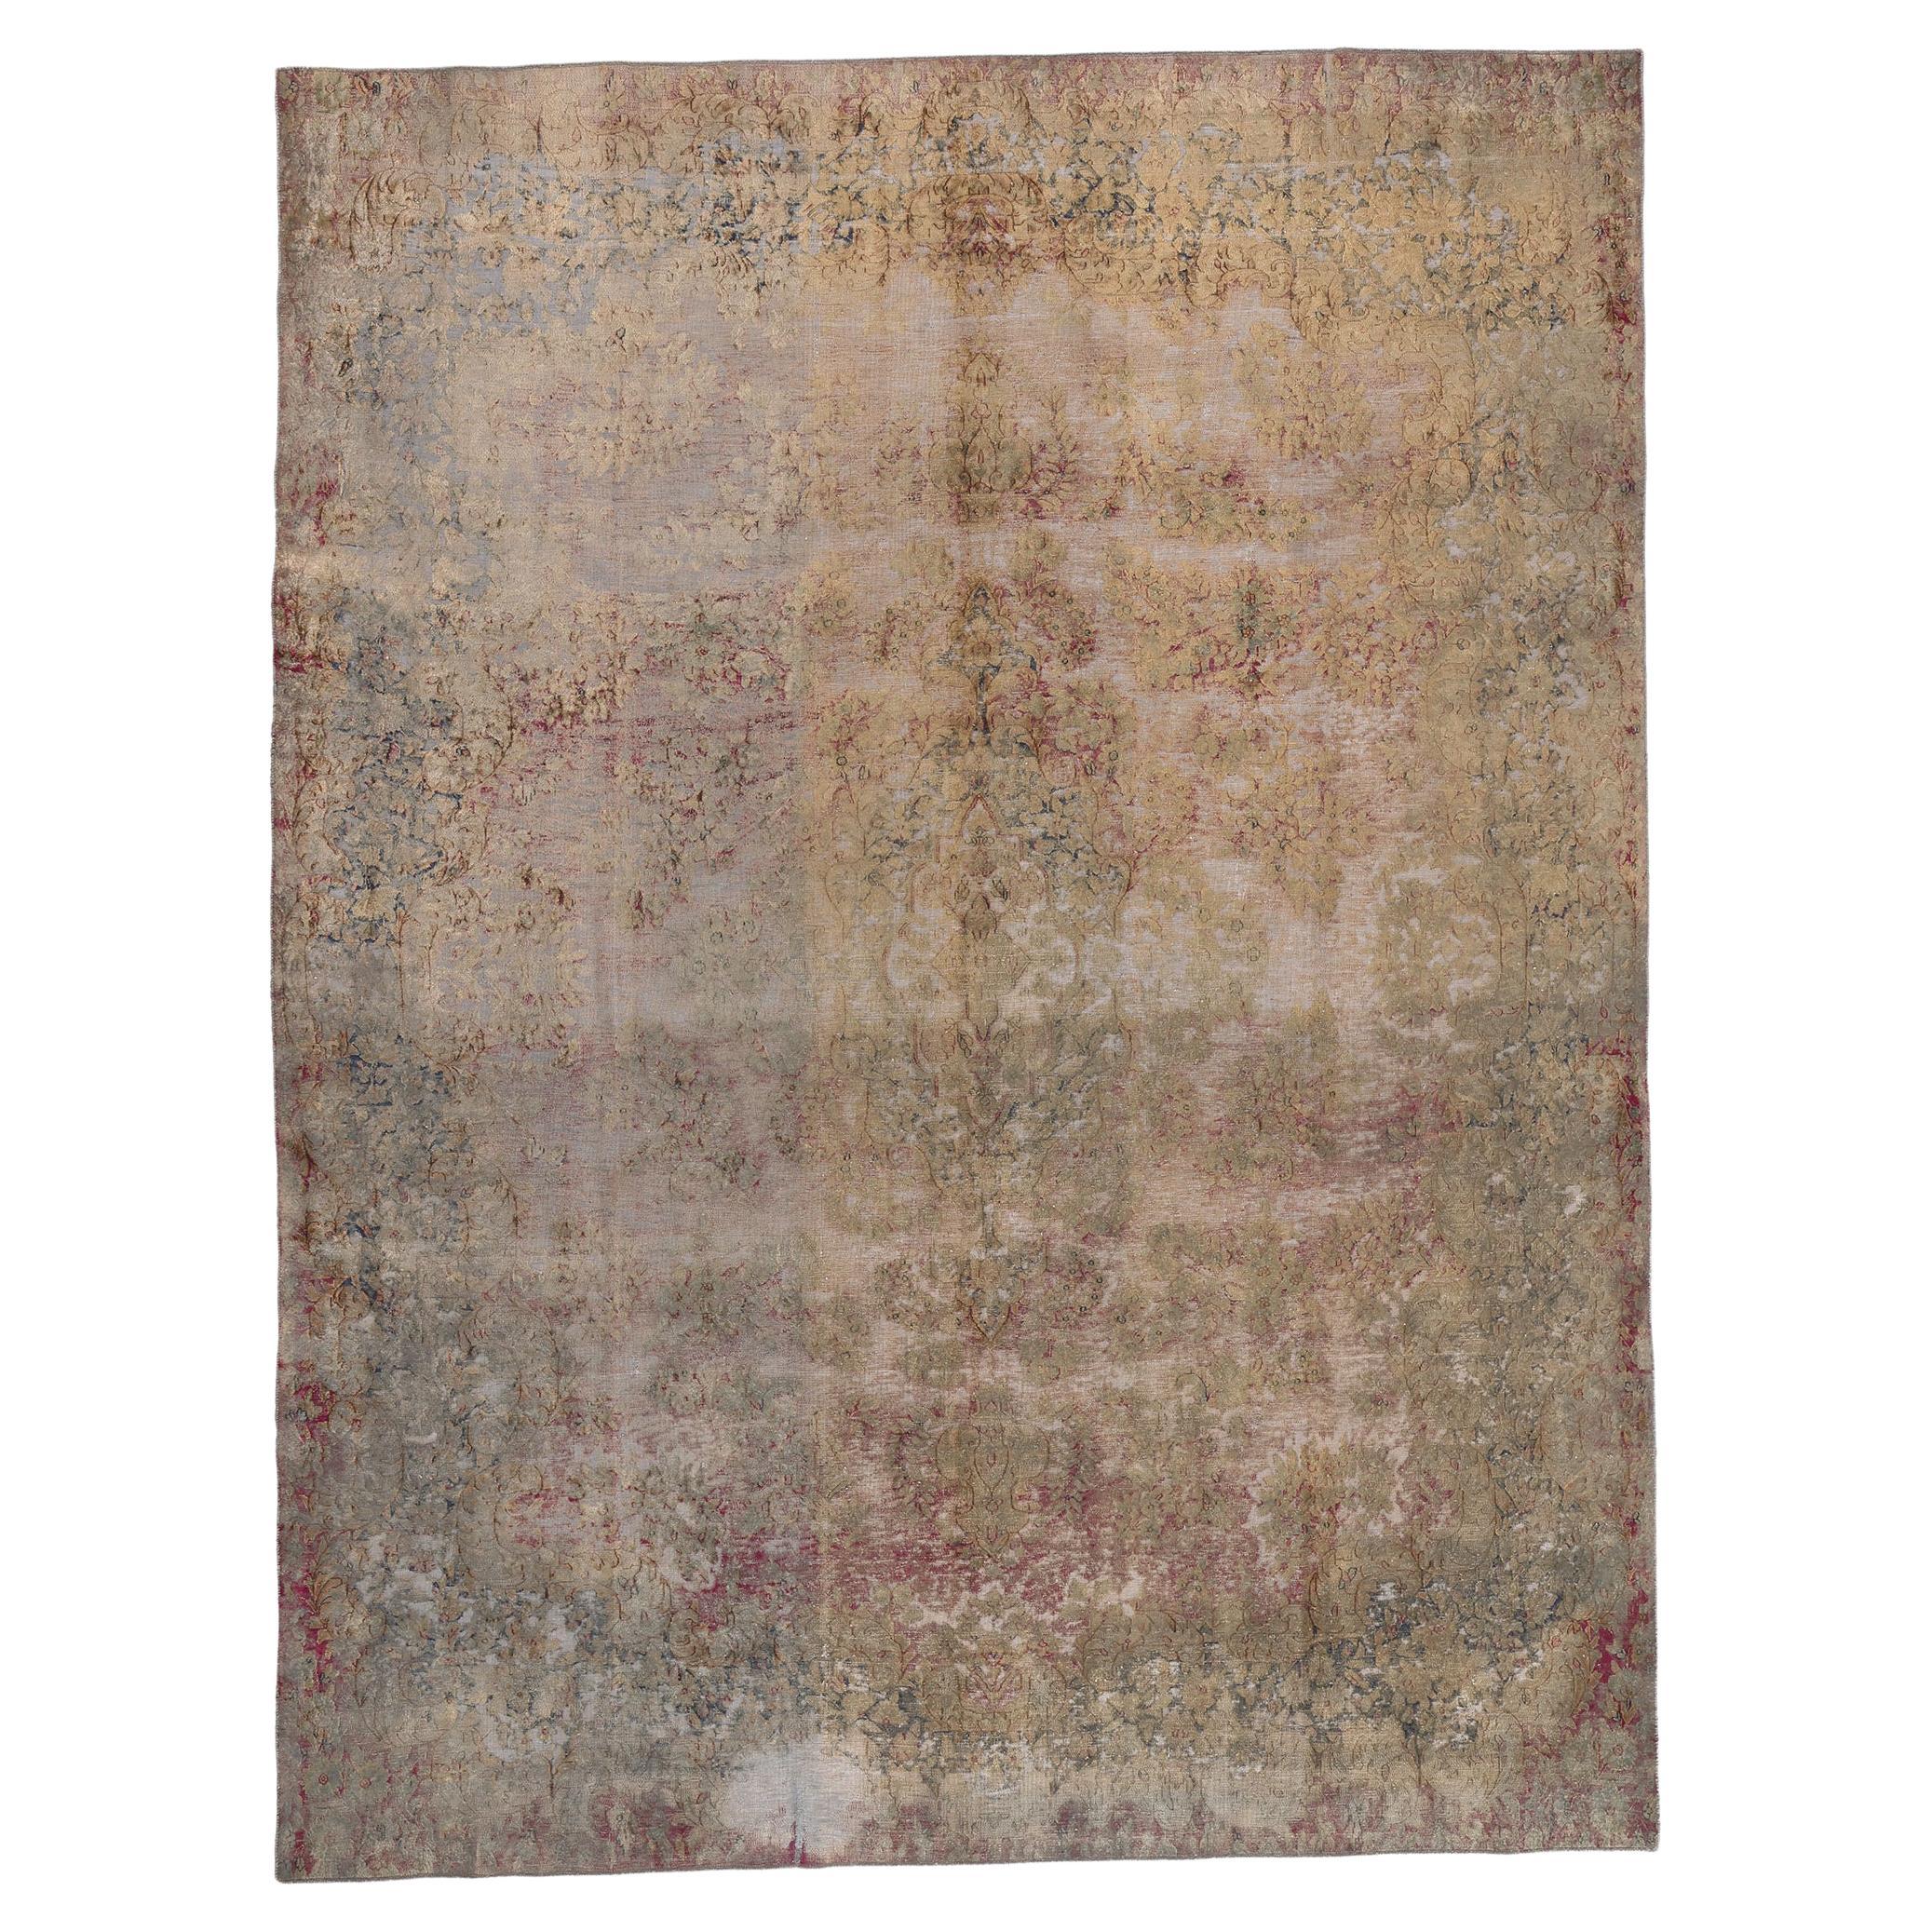 Vintage Turkish Overdyed Rug, Romantic Industrial Meets French Provincial